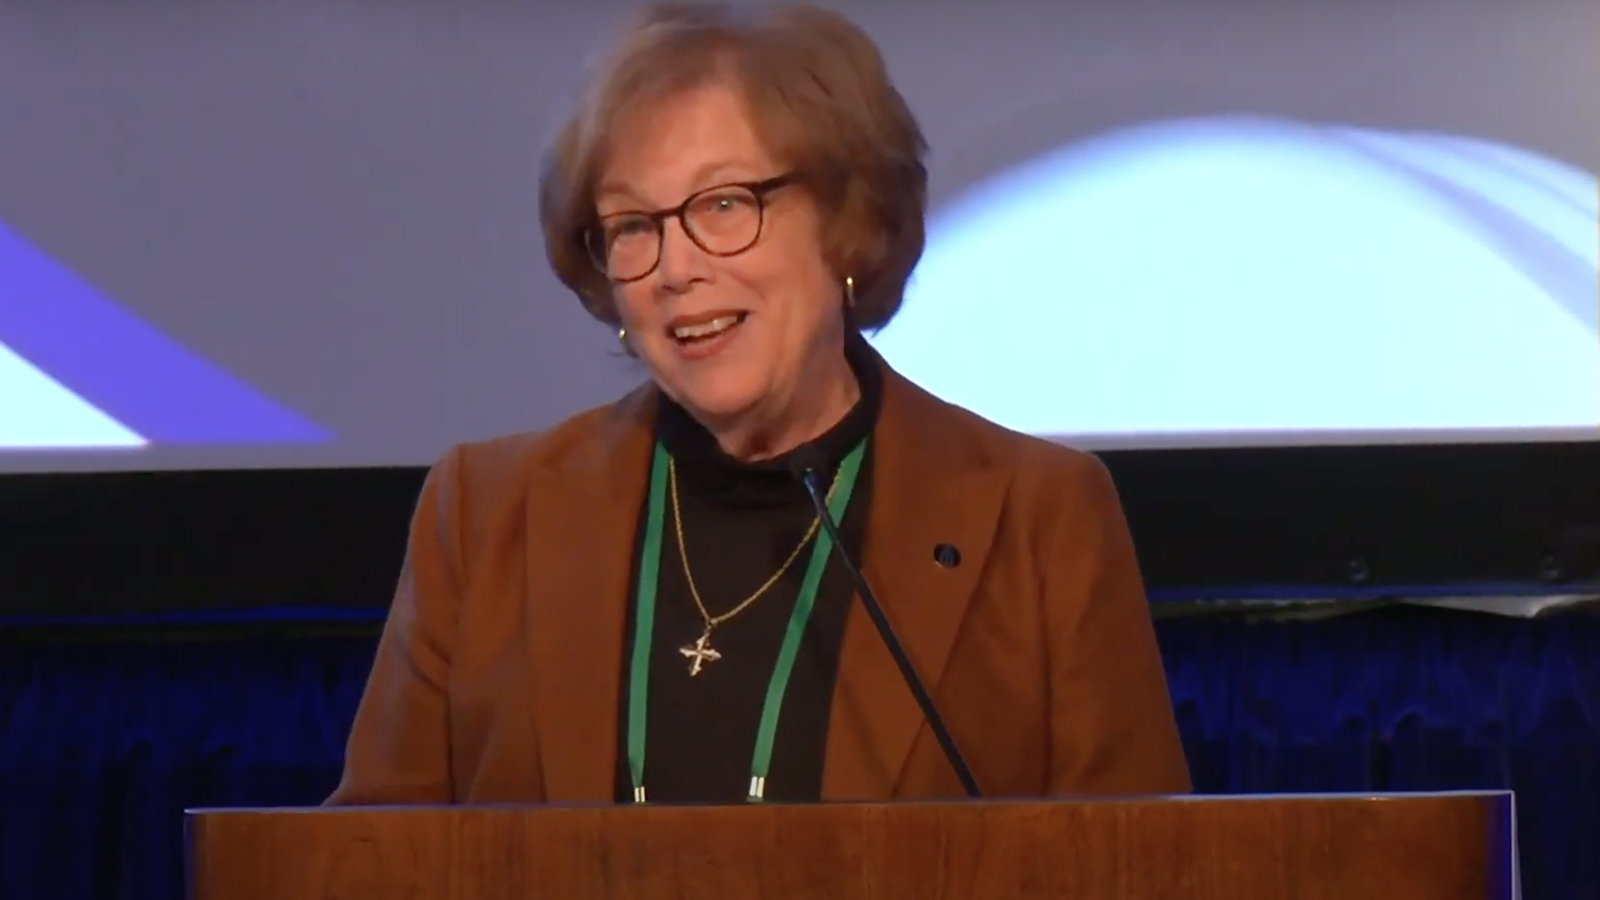 Sister Donna Markham, retiring president and CEO of Catholic Charities USA, addresses the U.S. Conference of Catholic Bishops fall meeting in Baltimore. Video screen grab